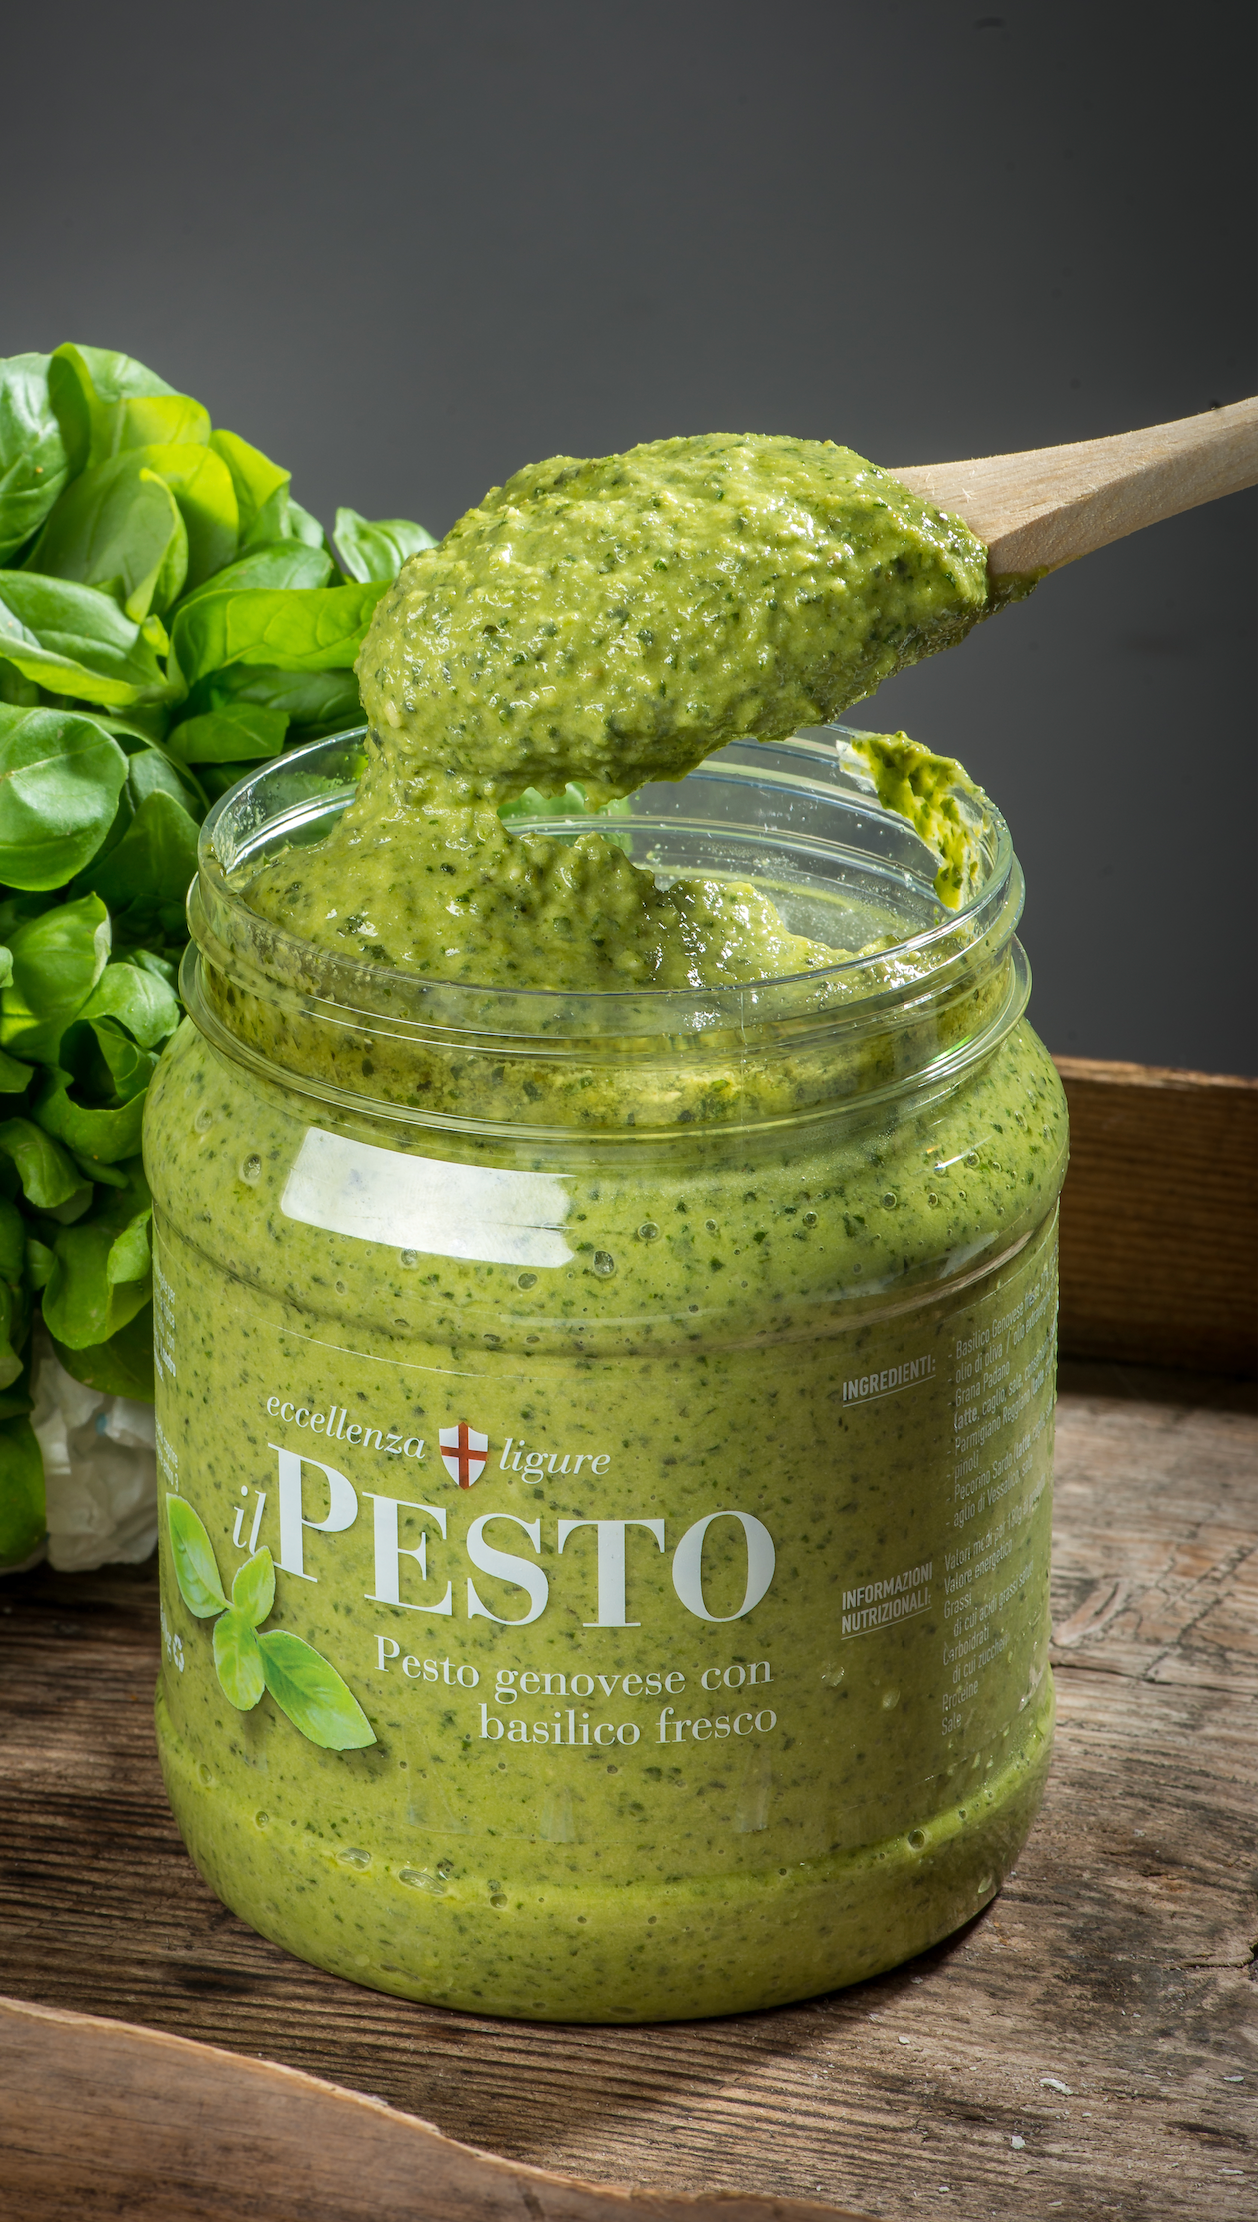 Genoese Pesto with Fresh Basil 4 jars of 250g - Packing and shipping included!